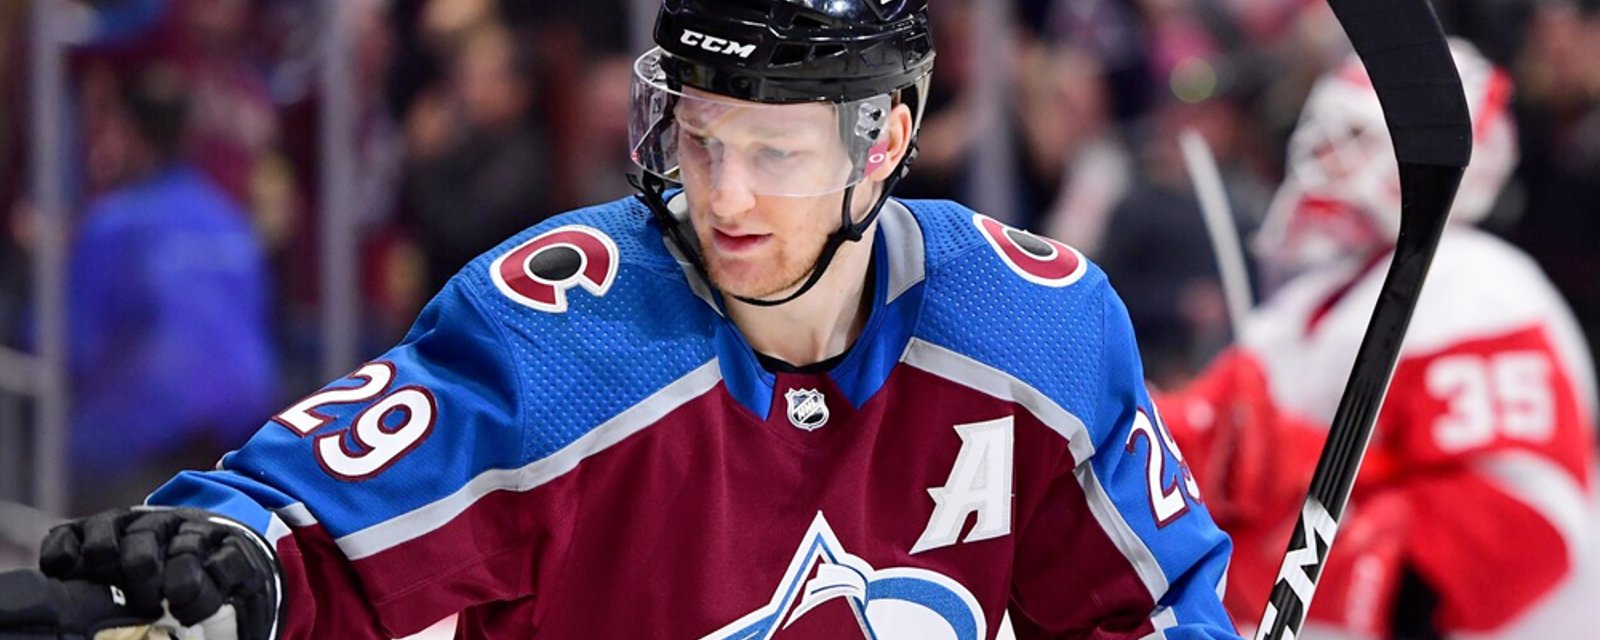 Avs completely changing their uniforms for 2021 season